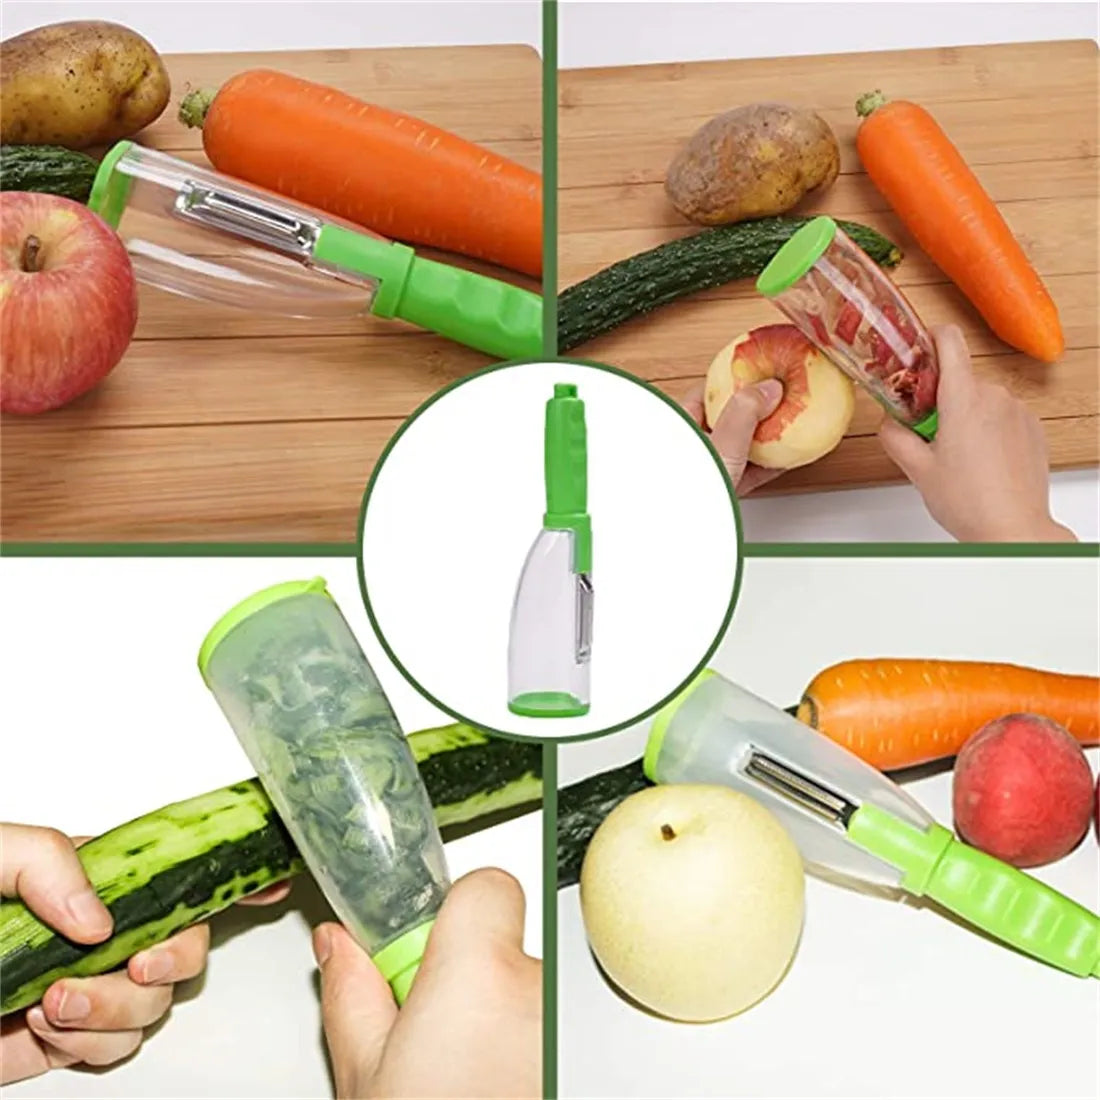 Stainless Steel Multi-functional Storage Peeler With A Container For Fruit And Vegetable Peeling In Pakistan